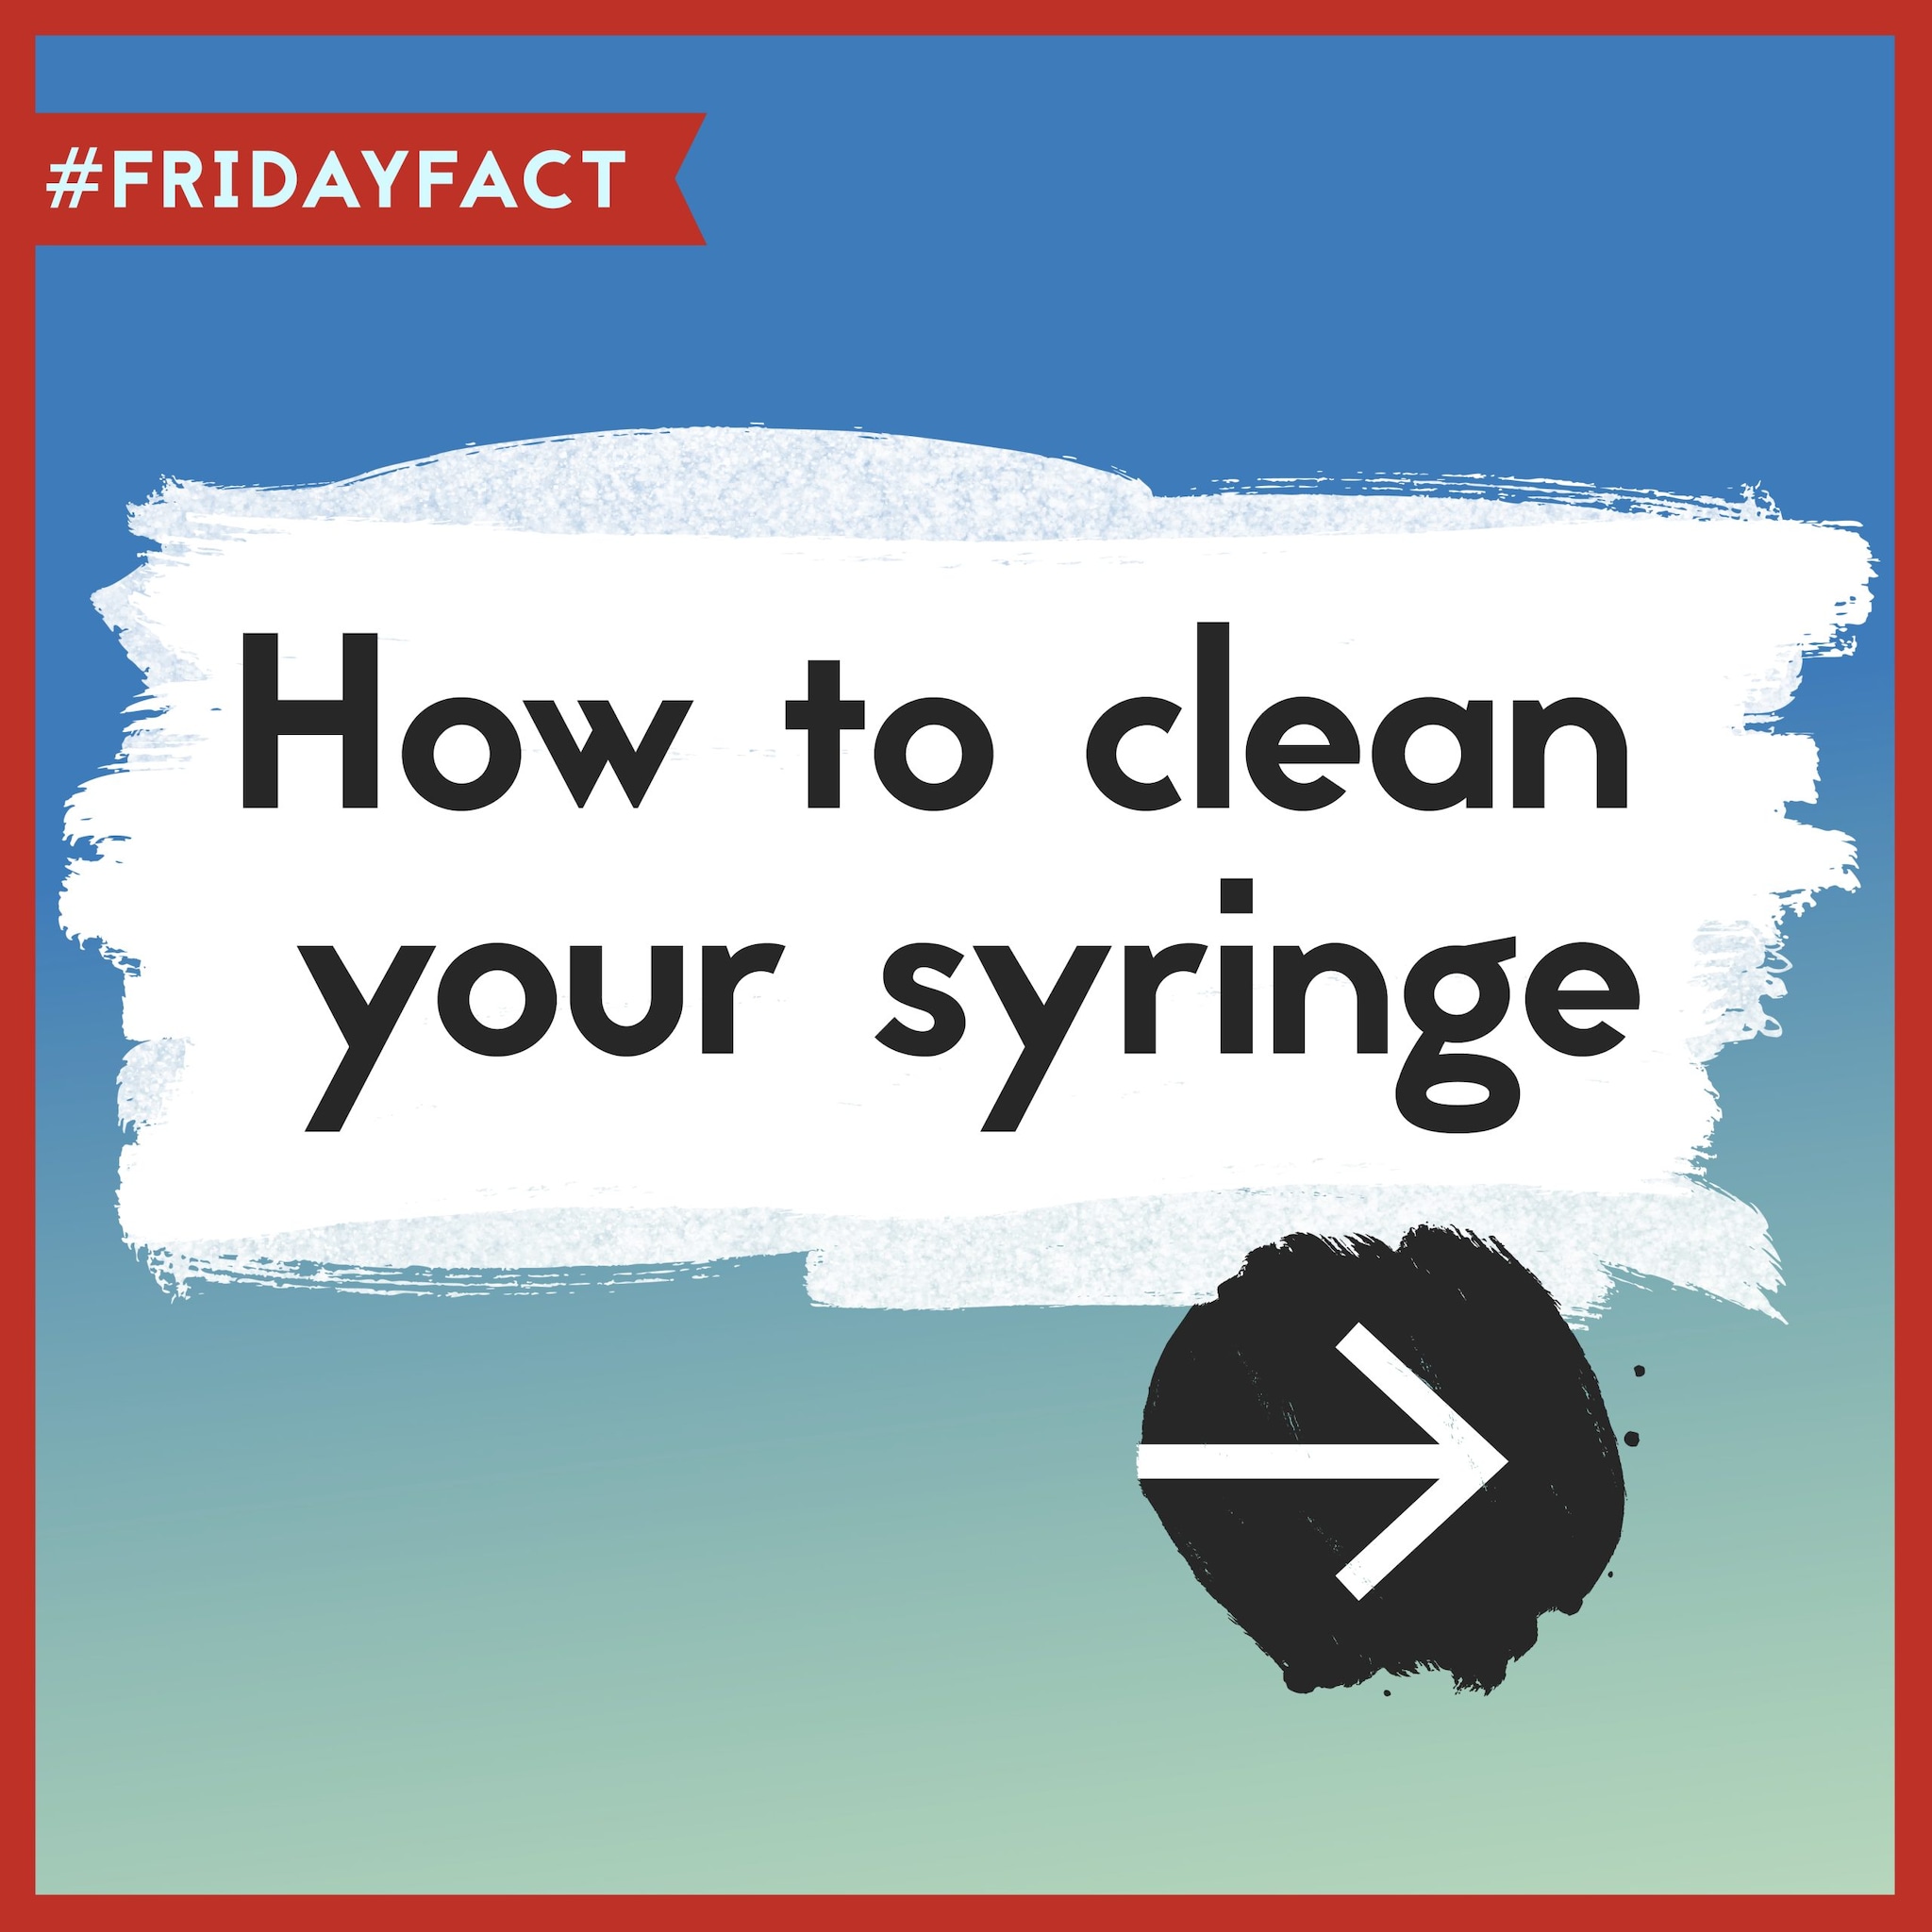 Text overlay: “#FridayFact How to clean your syringe.”